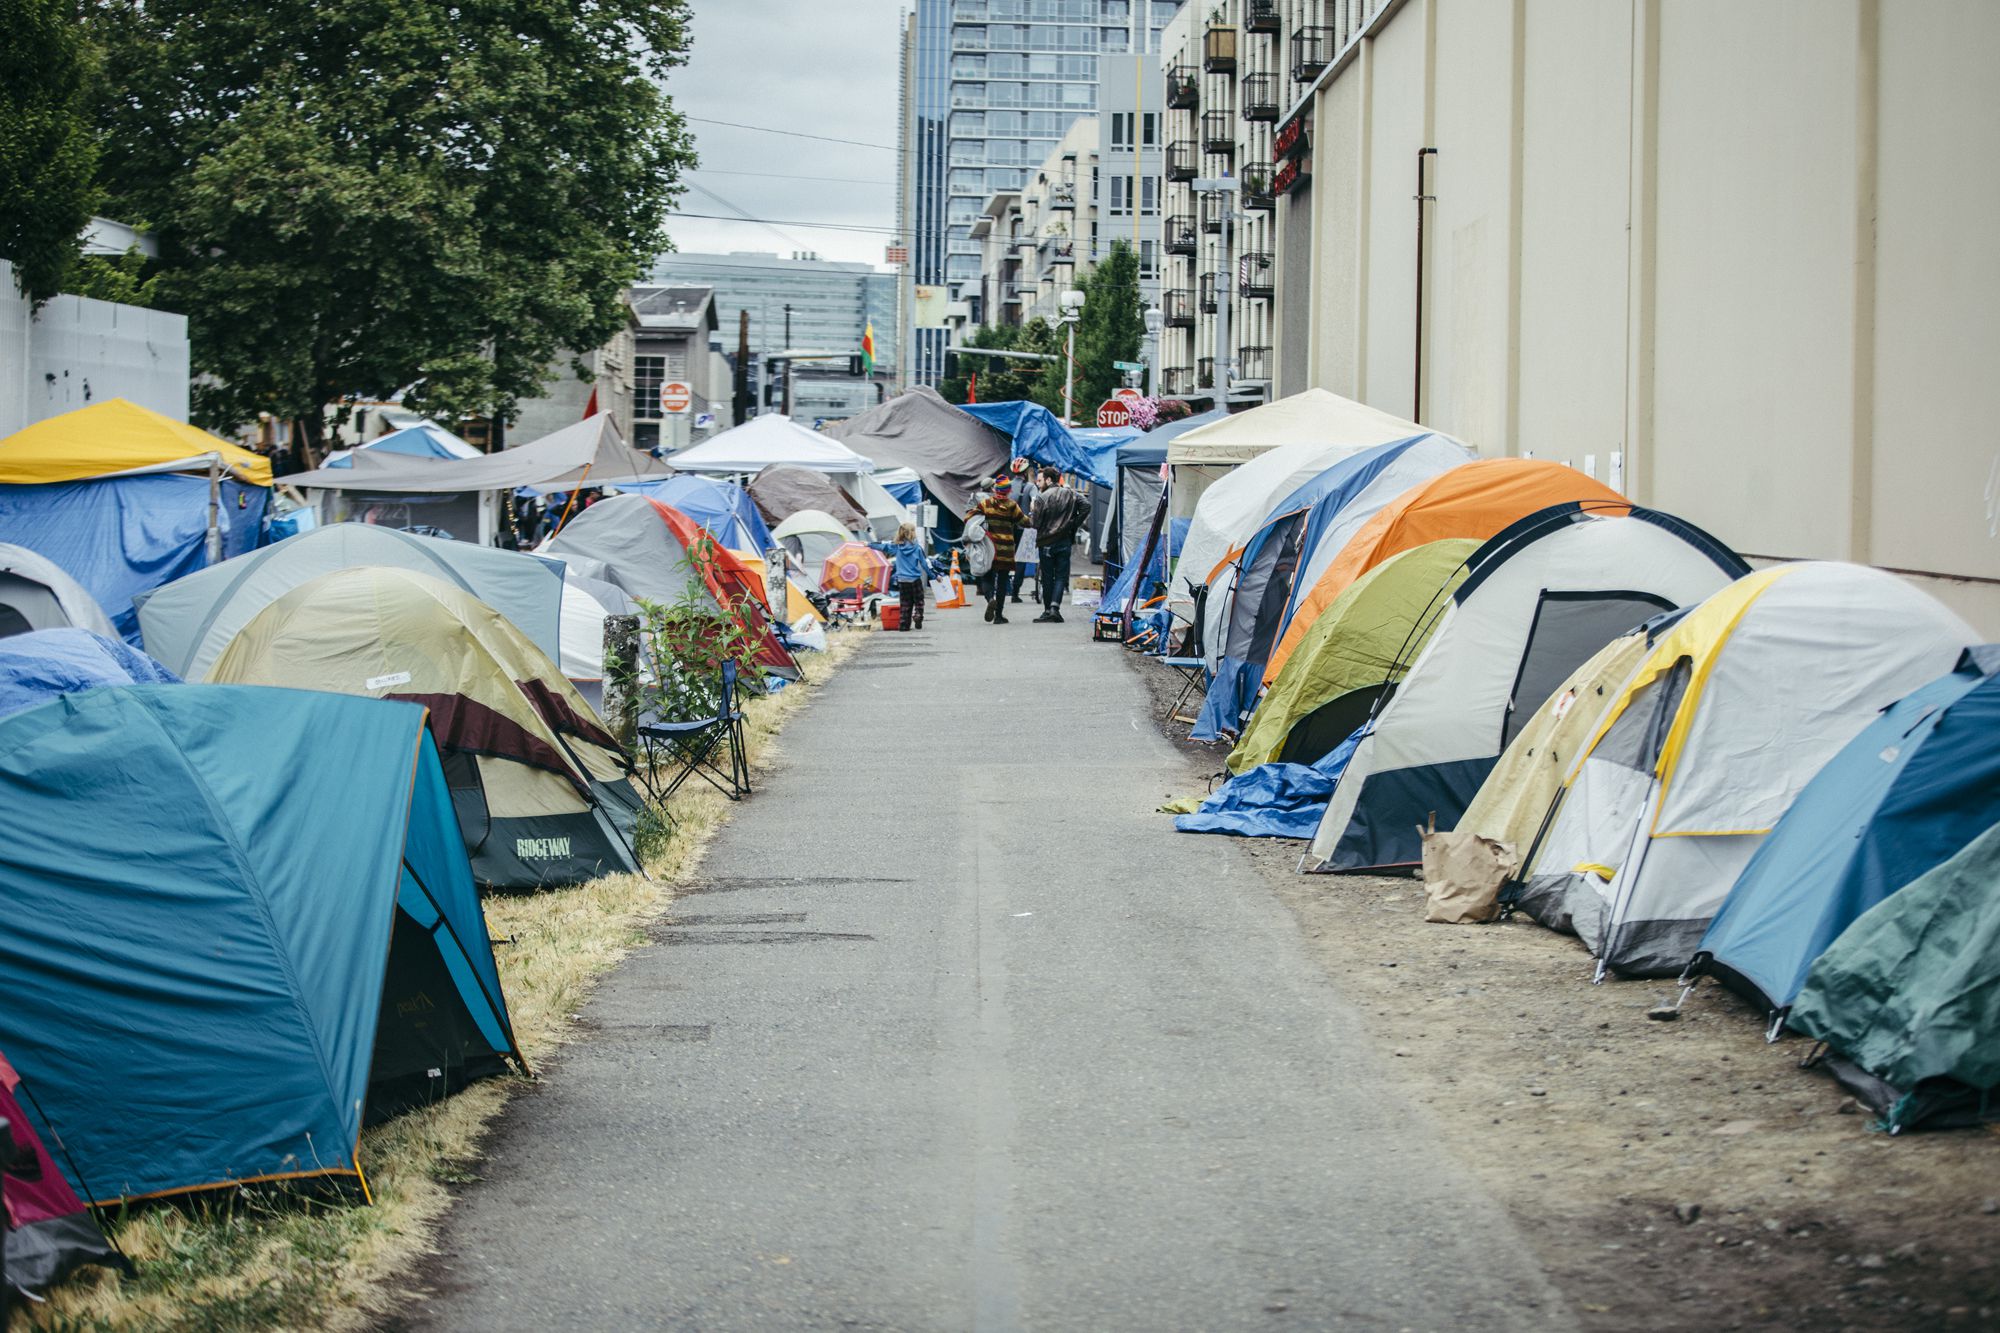 City Council Candidate Rene Gonzalez Uses Occupy ICE Photo as Example of Portland Homeless Camps